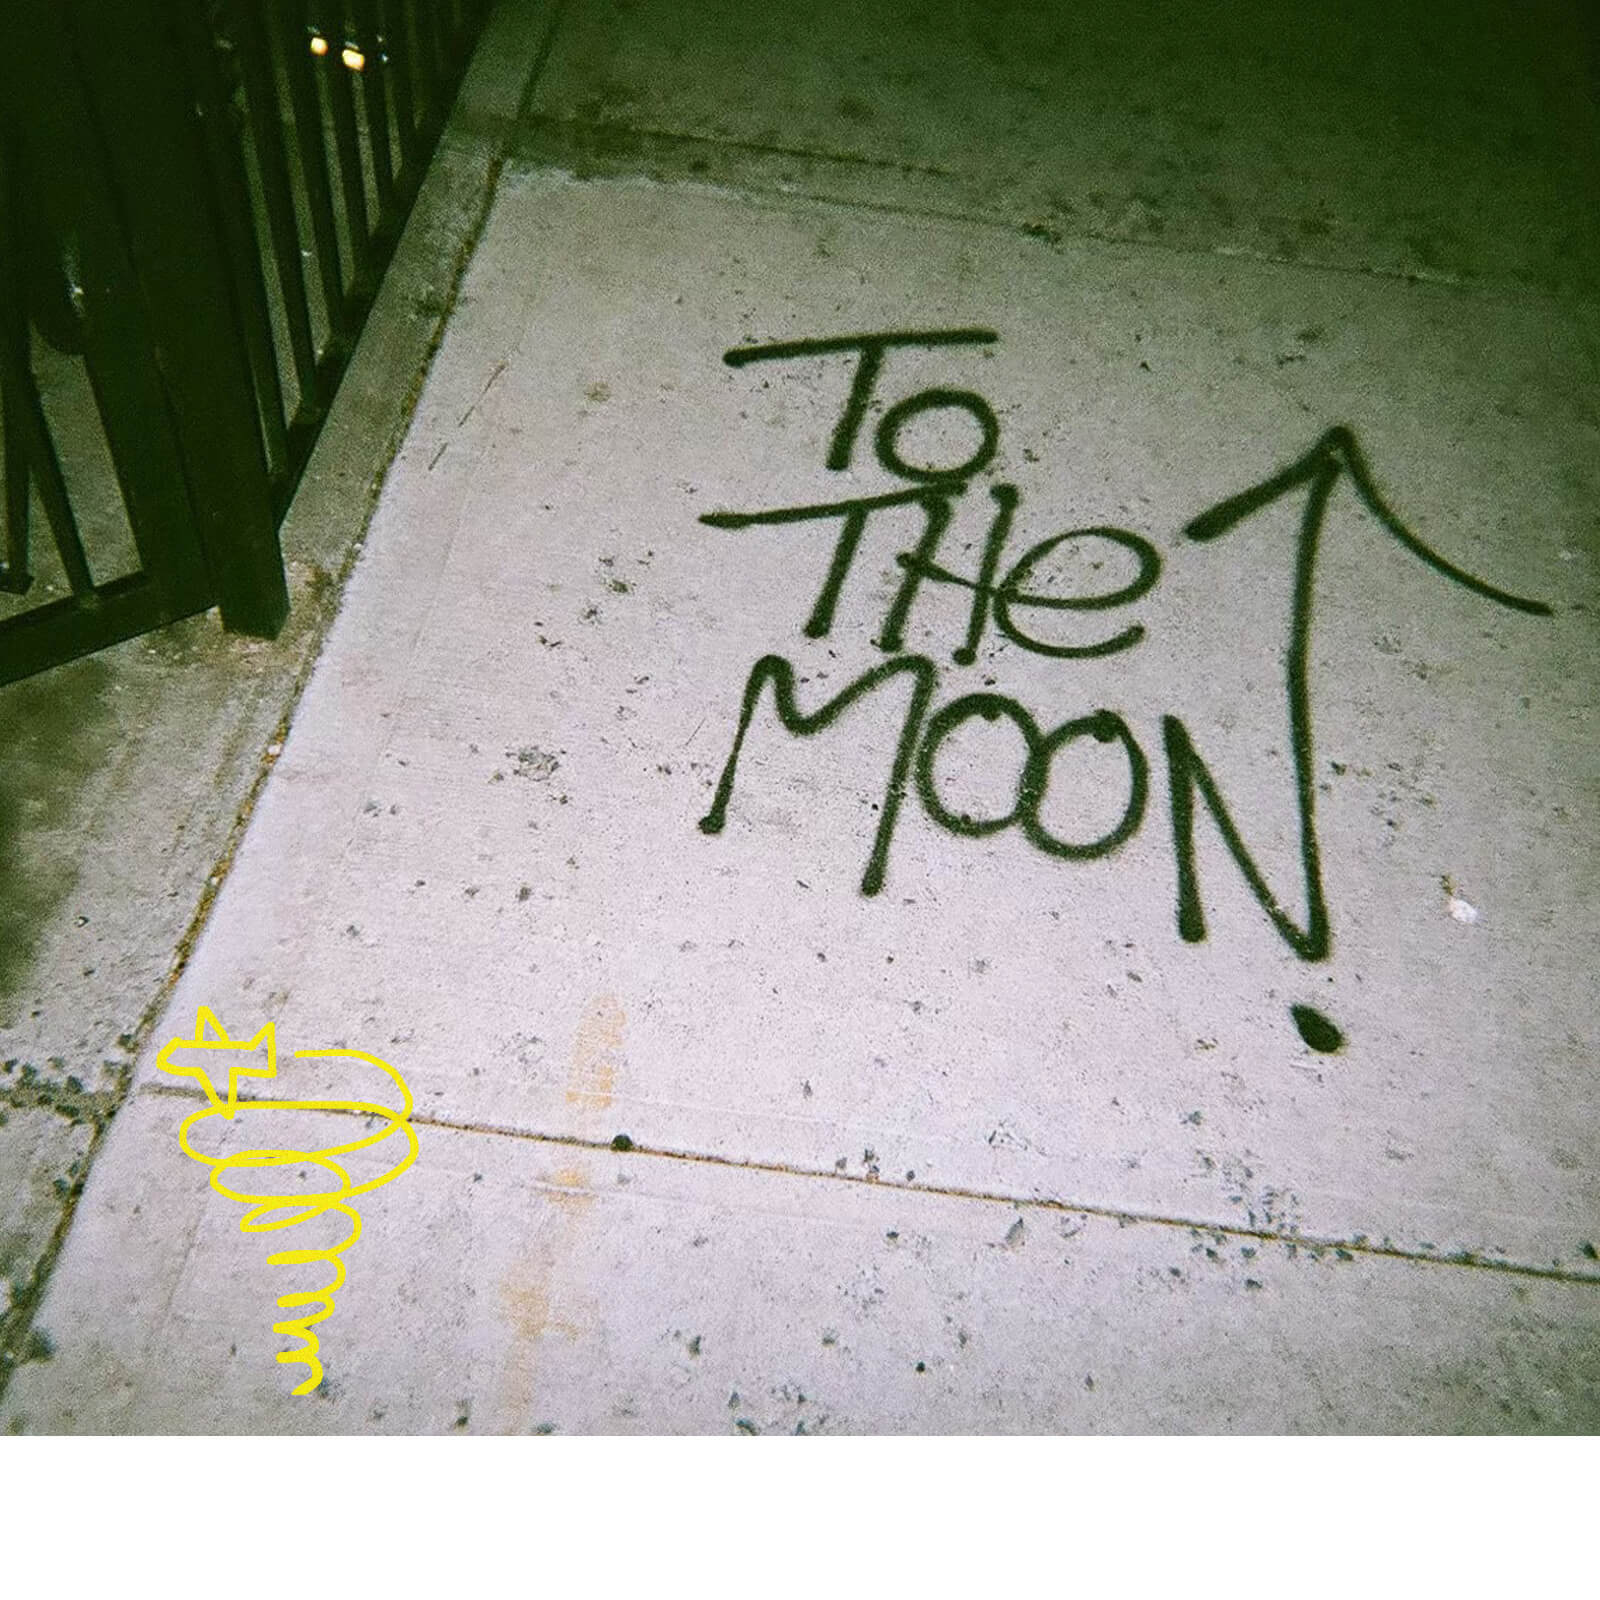 Yogee New Waves、4th e.p.リード曲「to the moon」MVが公開